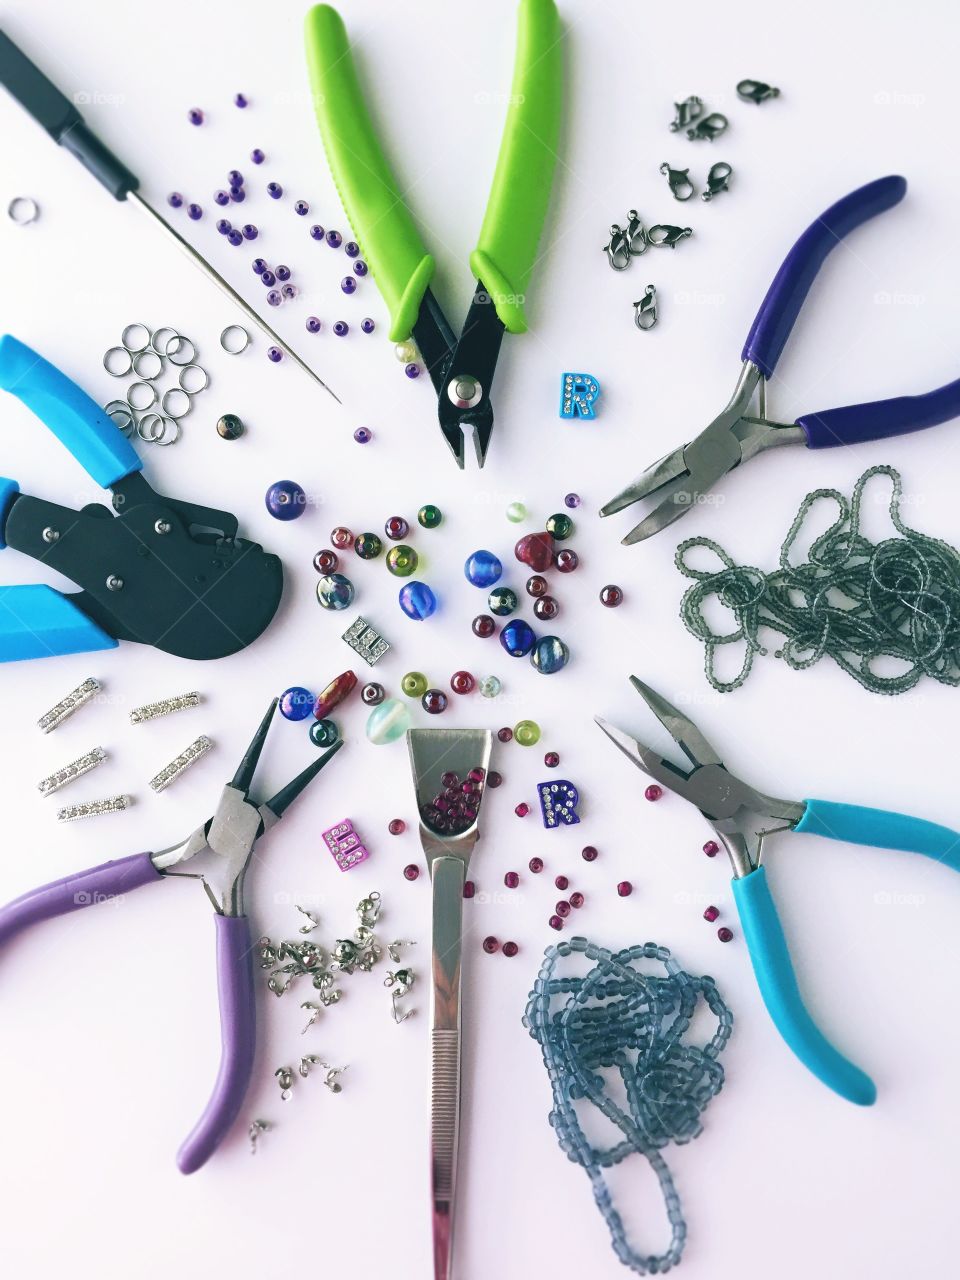 Arts & Crafts Supply - beading tools, glass beads, seed beads, rings, fasteners, 